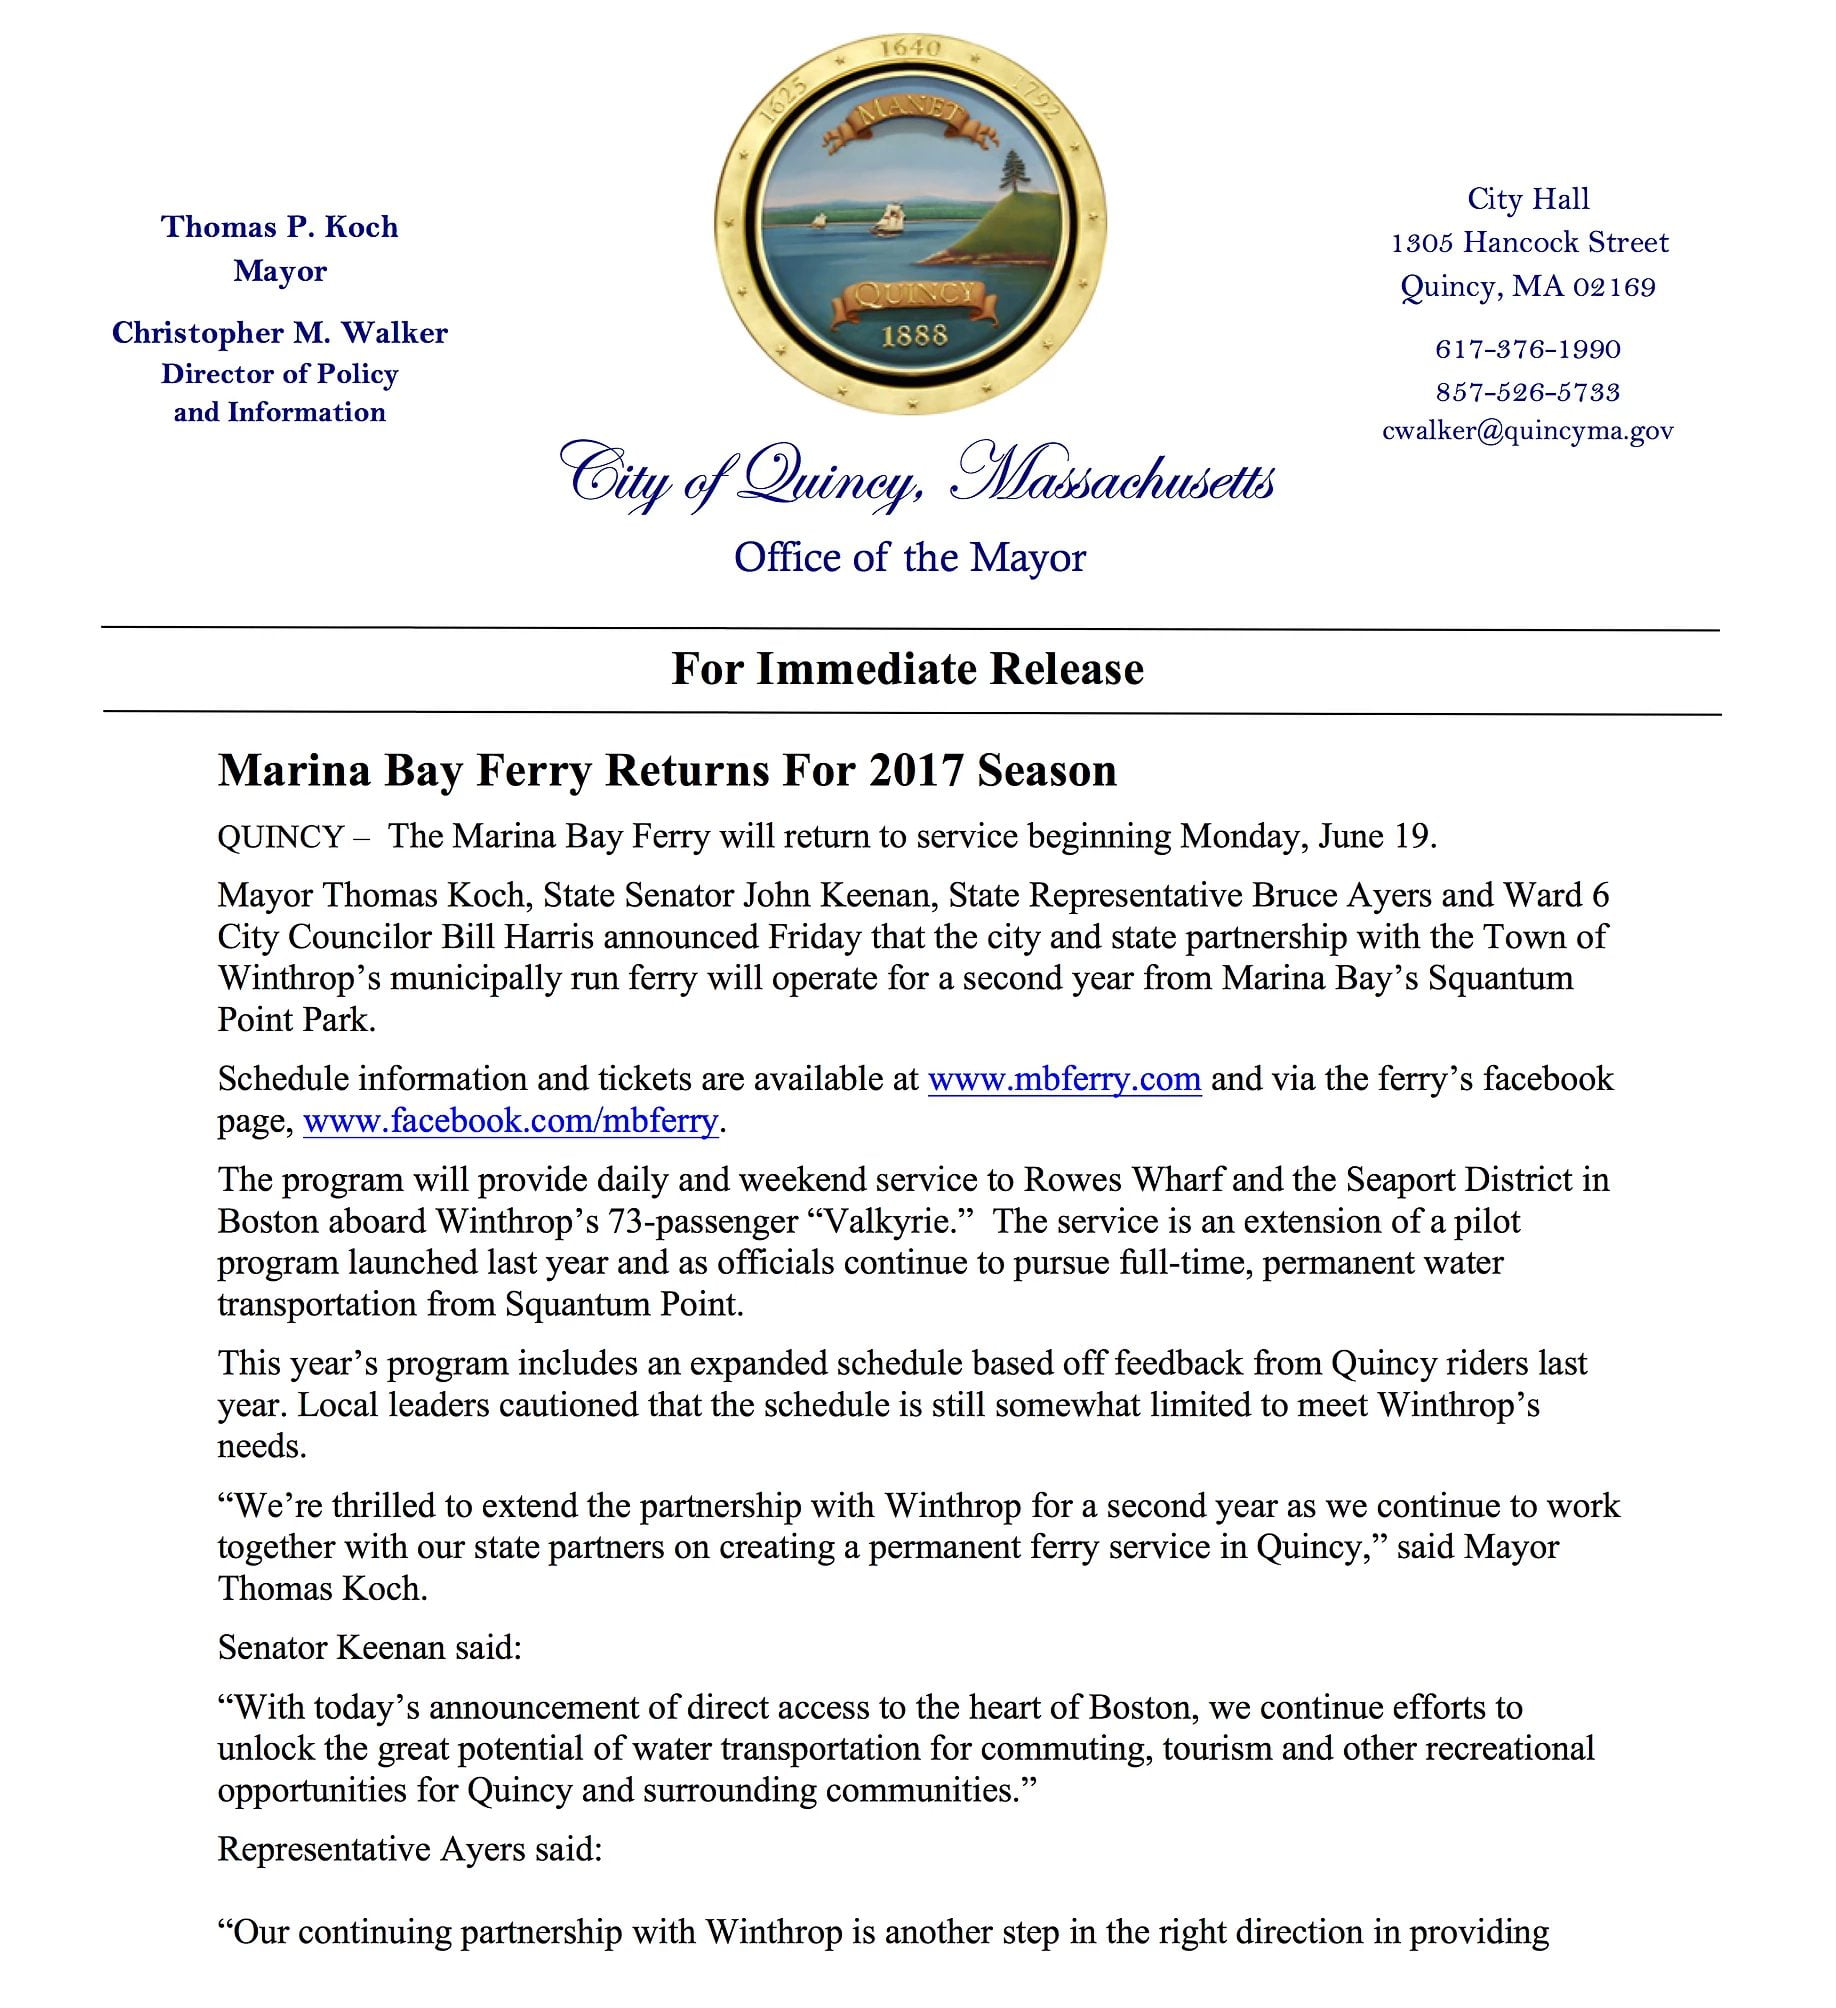 press release from the city of quincy